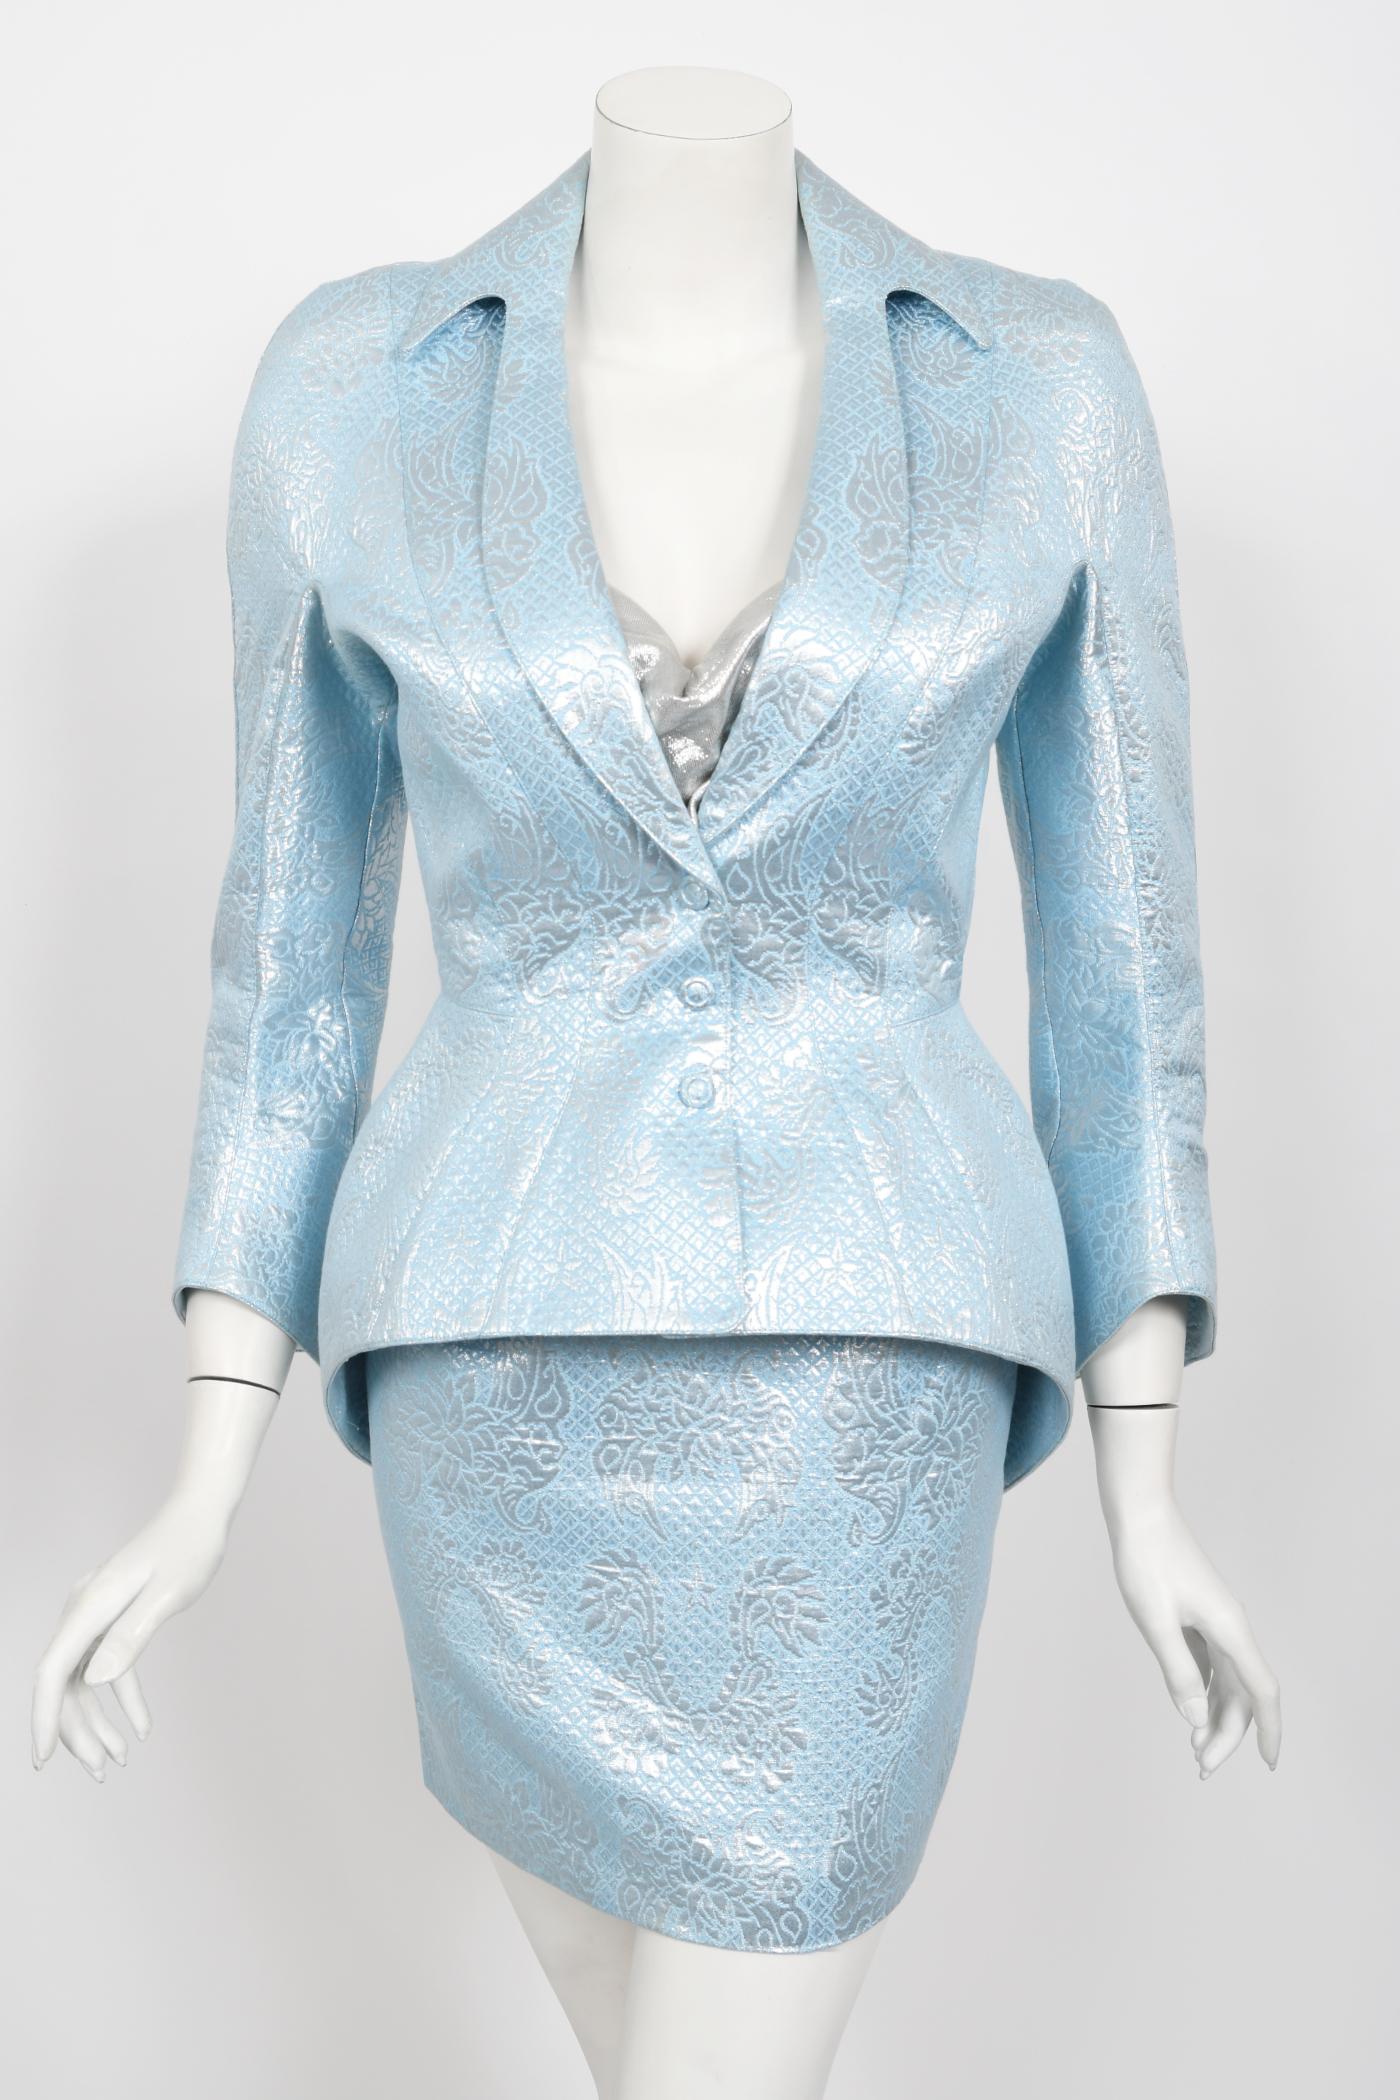 Iconic 1992 Thierry Mugler Couture Metallic Silver Blue Bustier Mini Skirt Suit 2